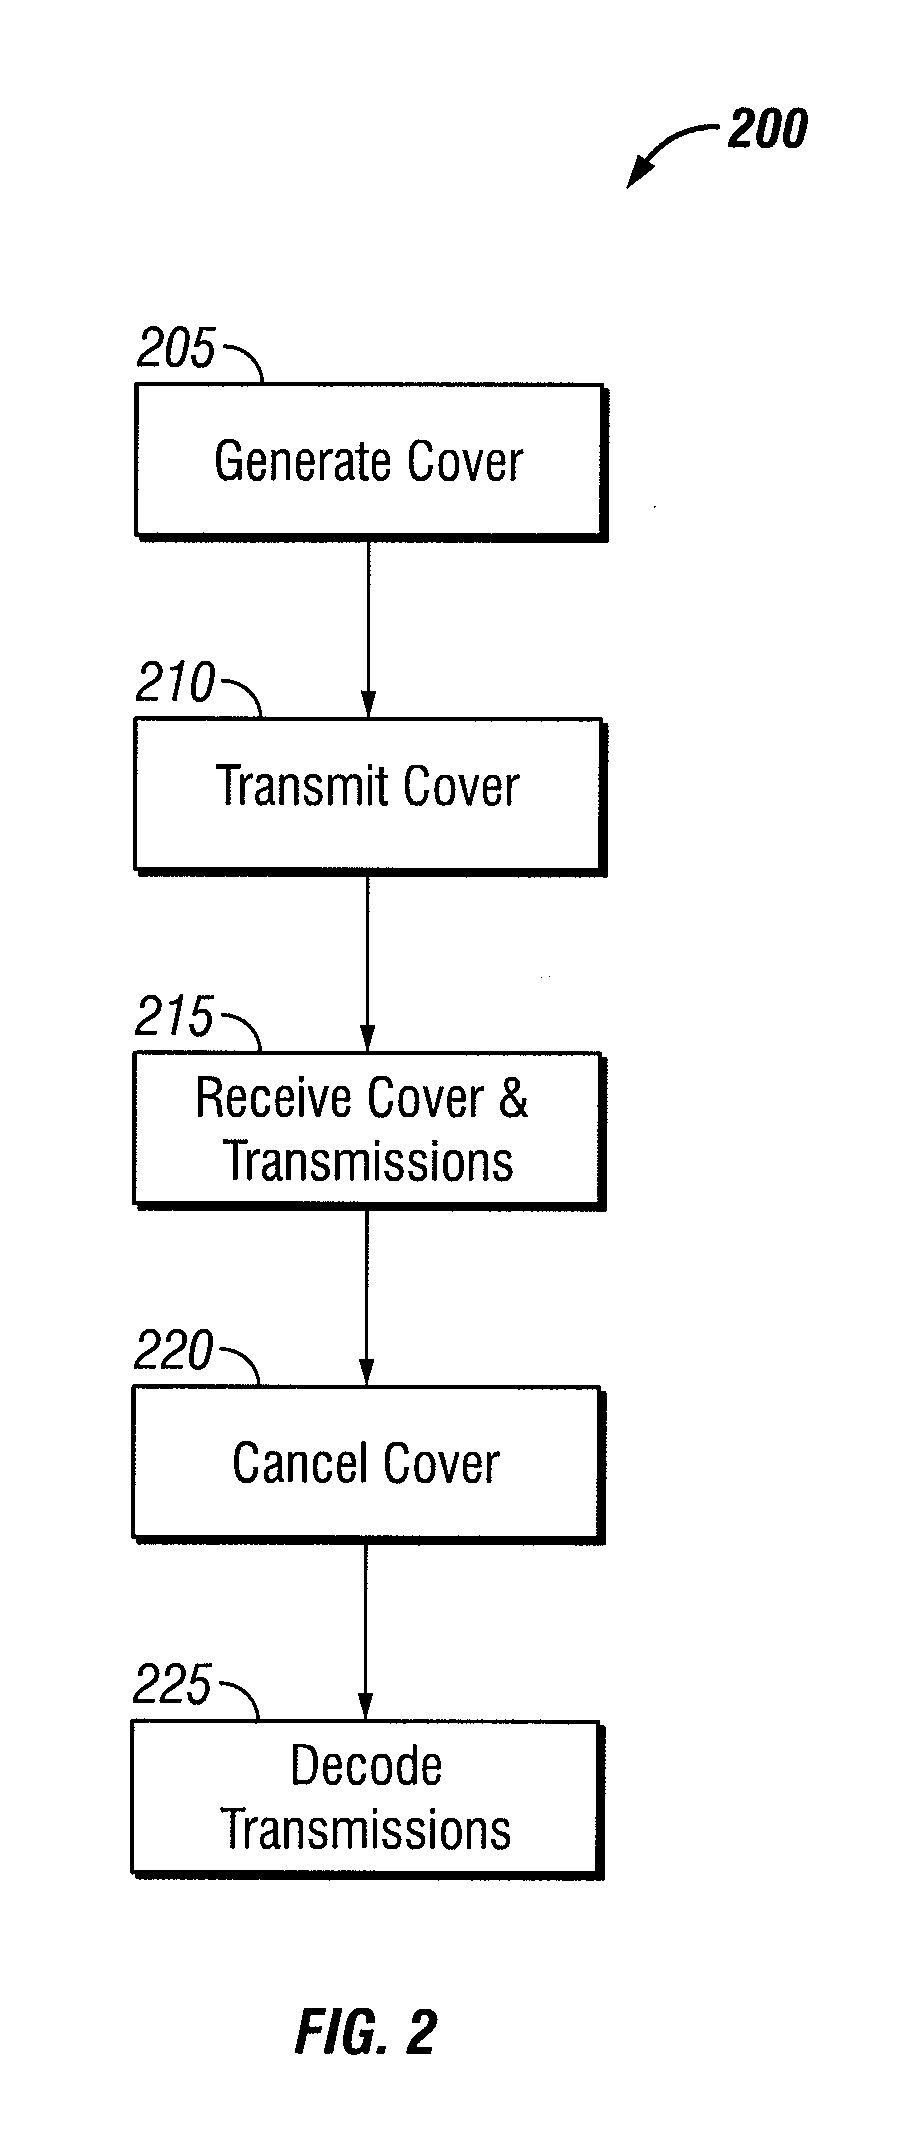 Traffic flow analysis mitigation using a cover signal